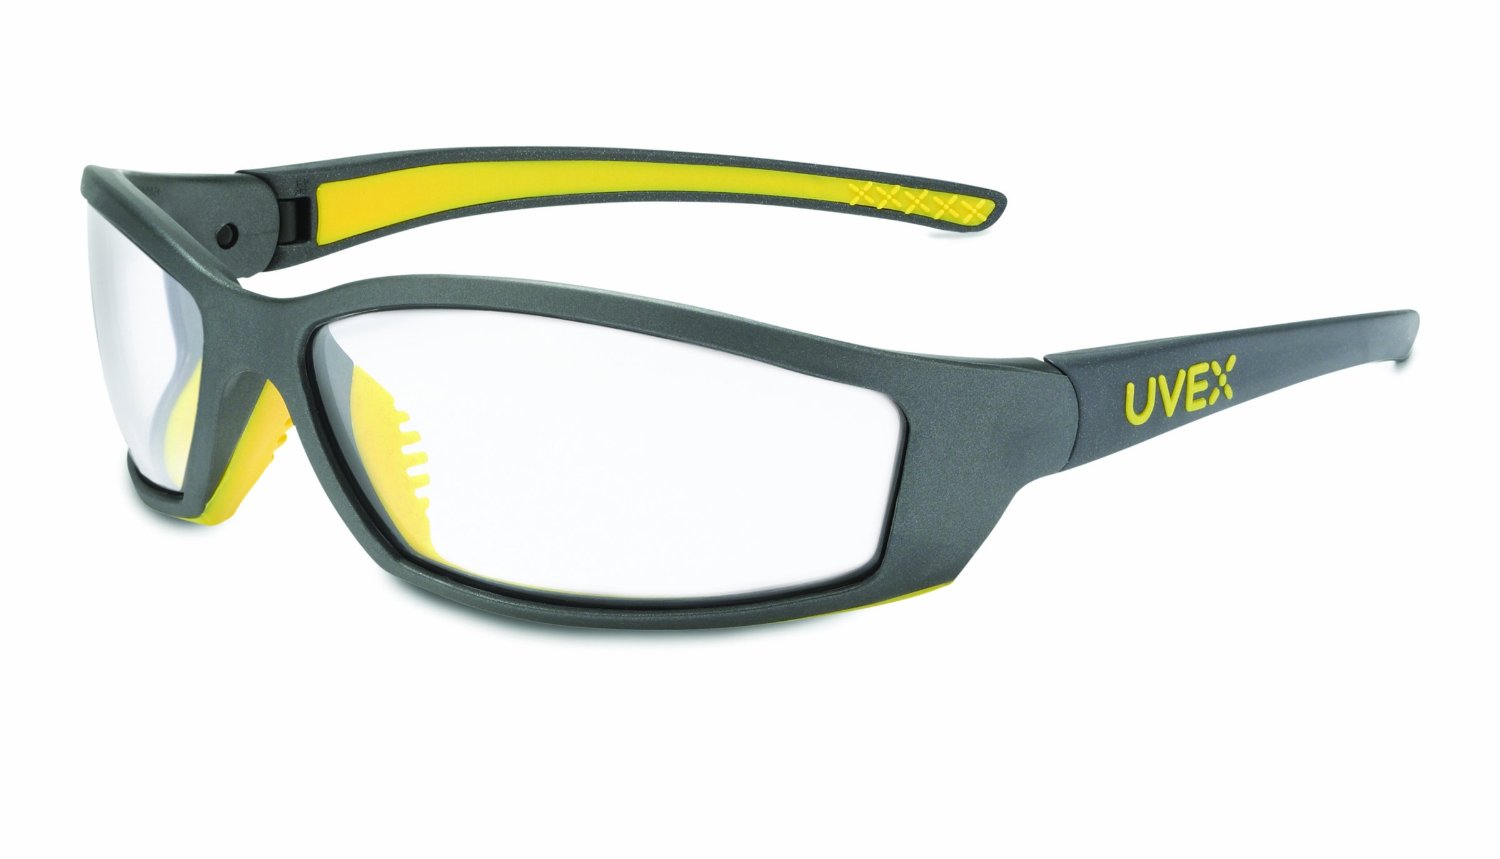 Uvex SolarPro Safety Eyewear with a Super Cool Gray and Yellow Frame